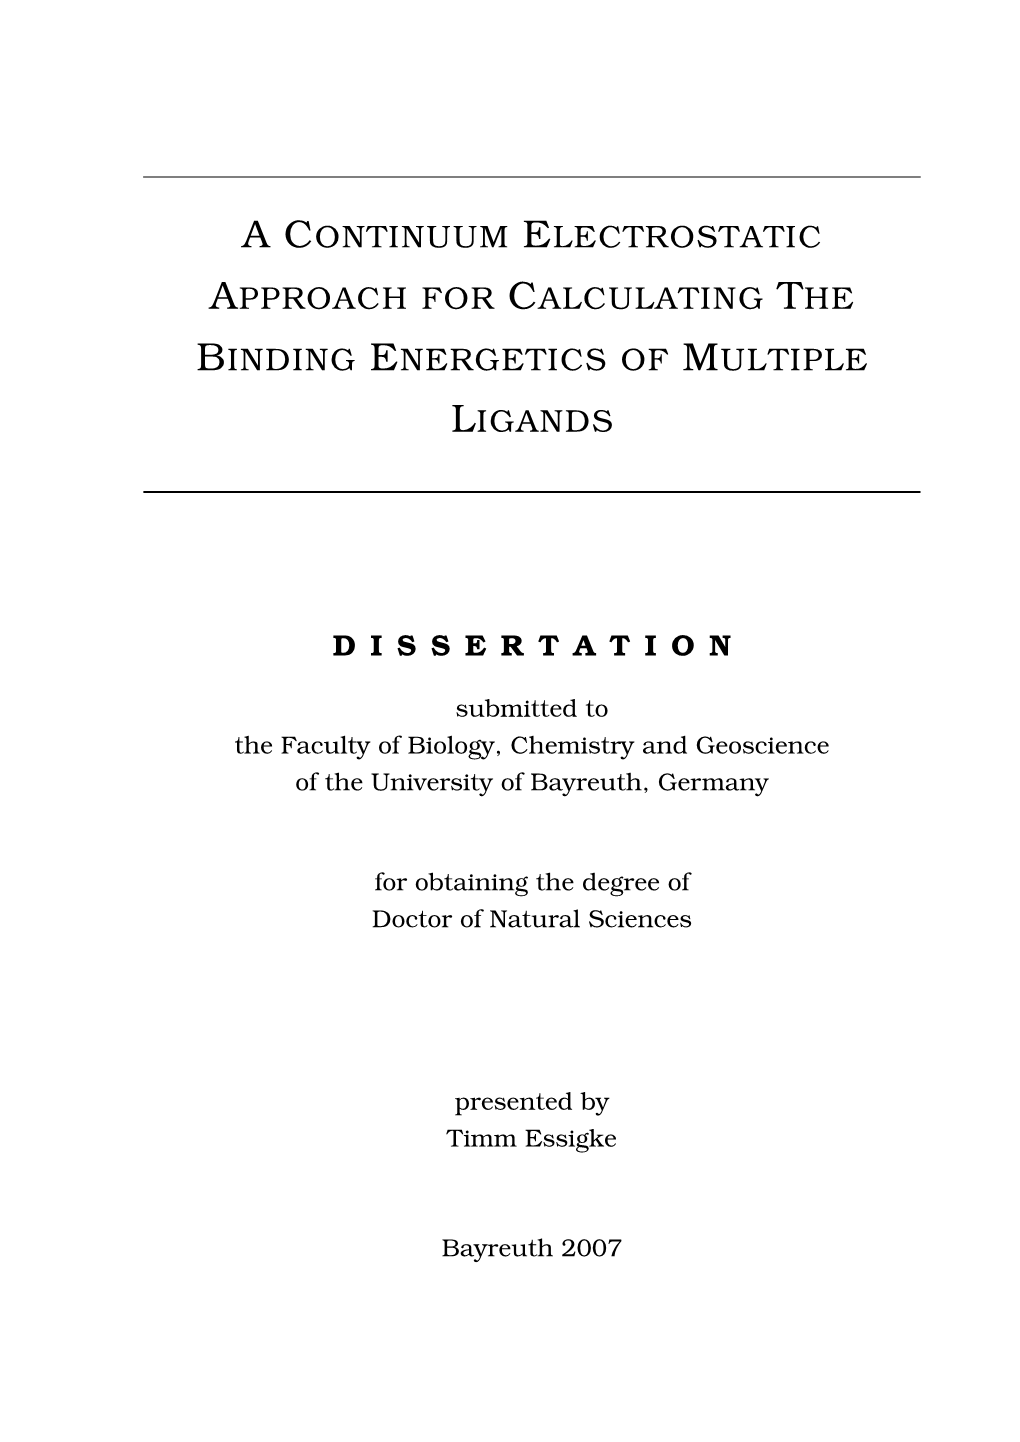 A Continuum Electrostatic Approach for Calculating the Binding